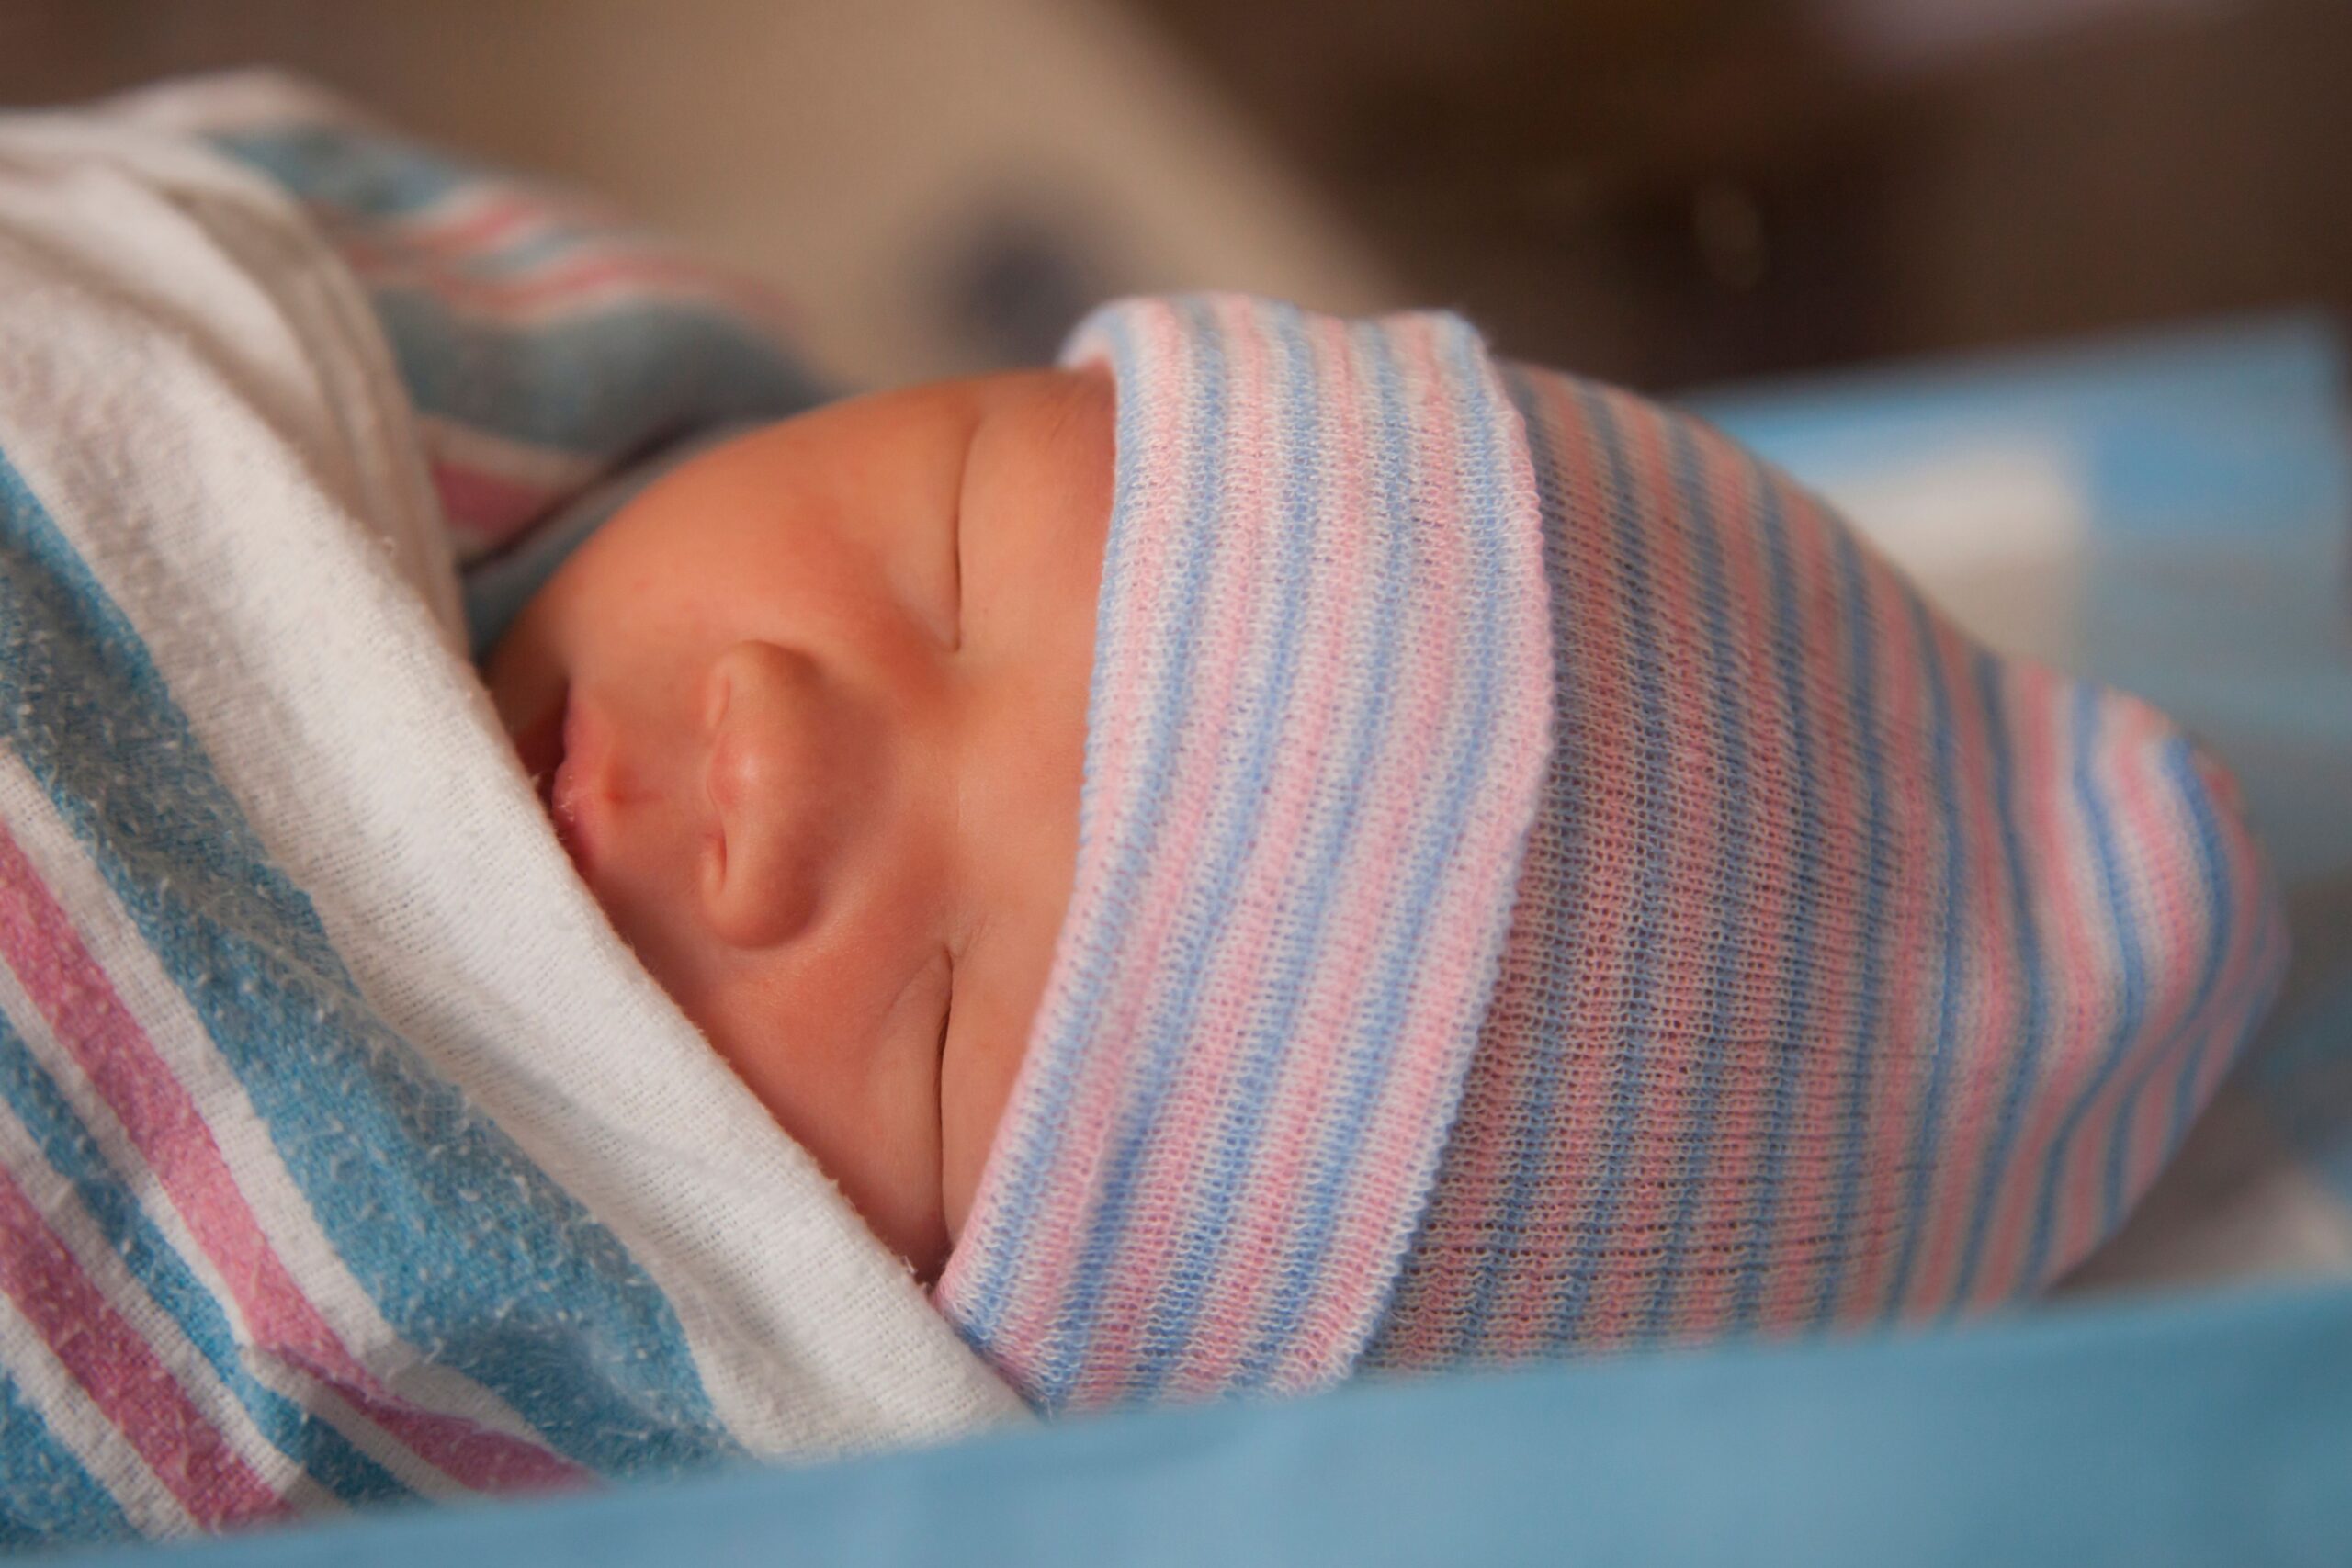 What You Need to Know About Newborn Screening